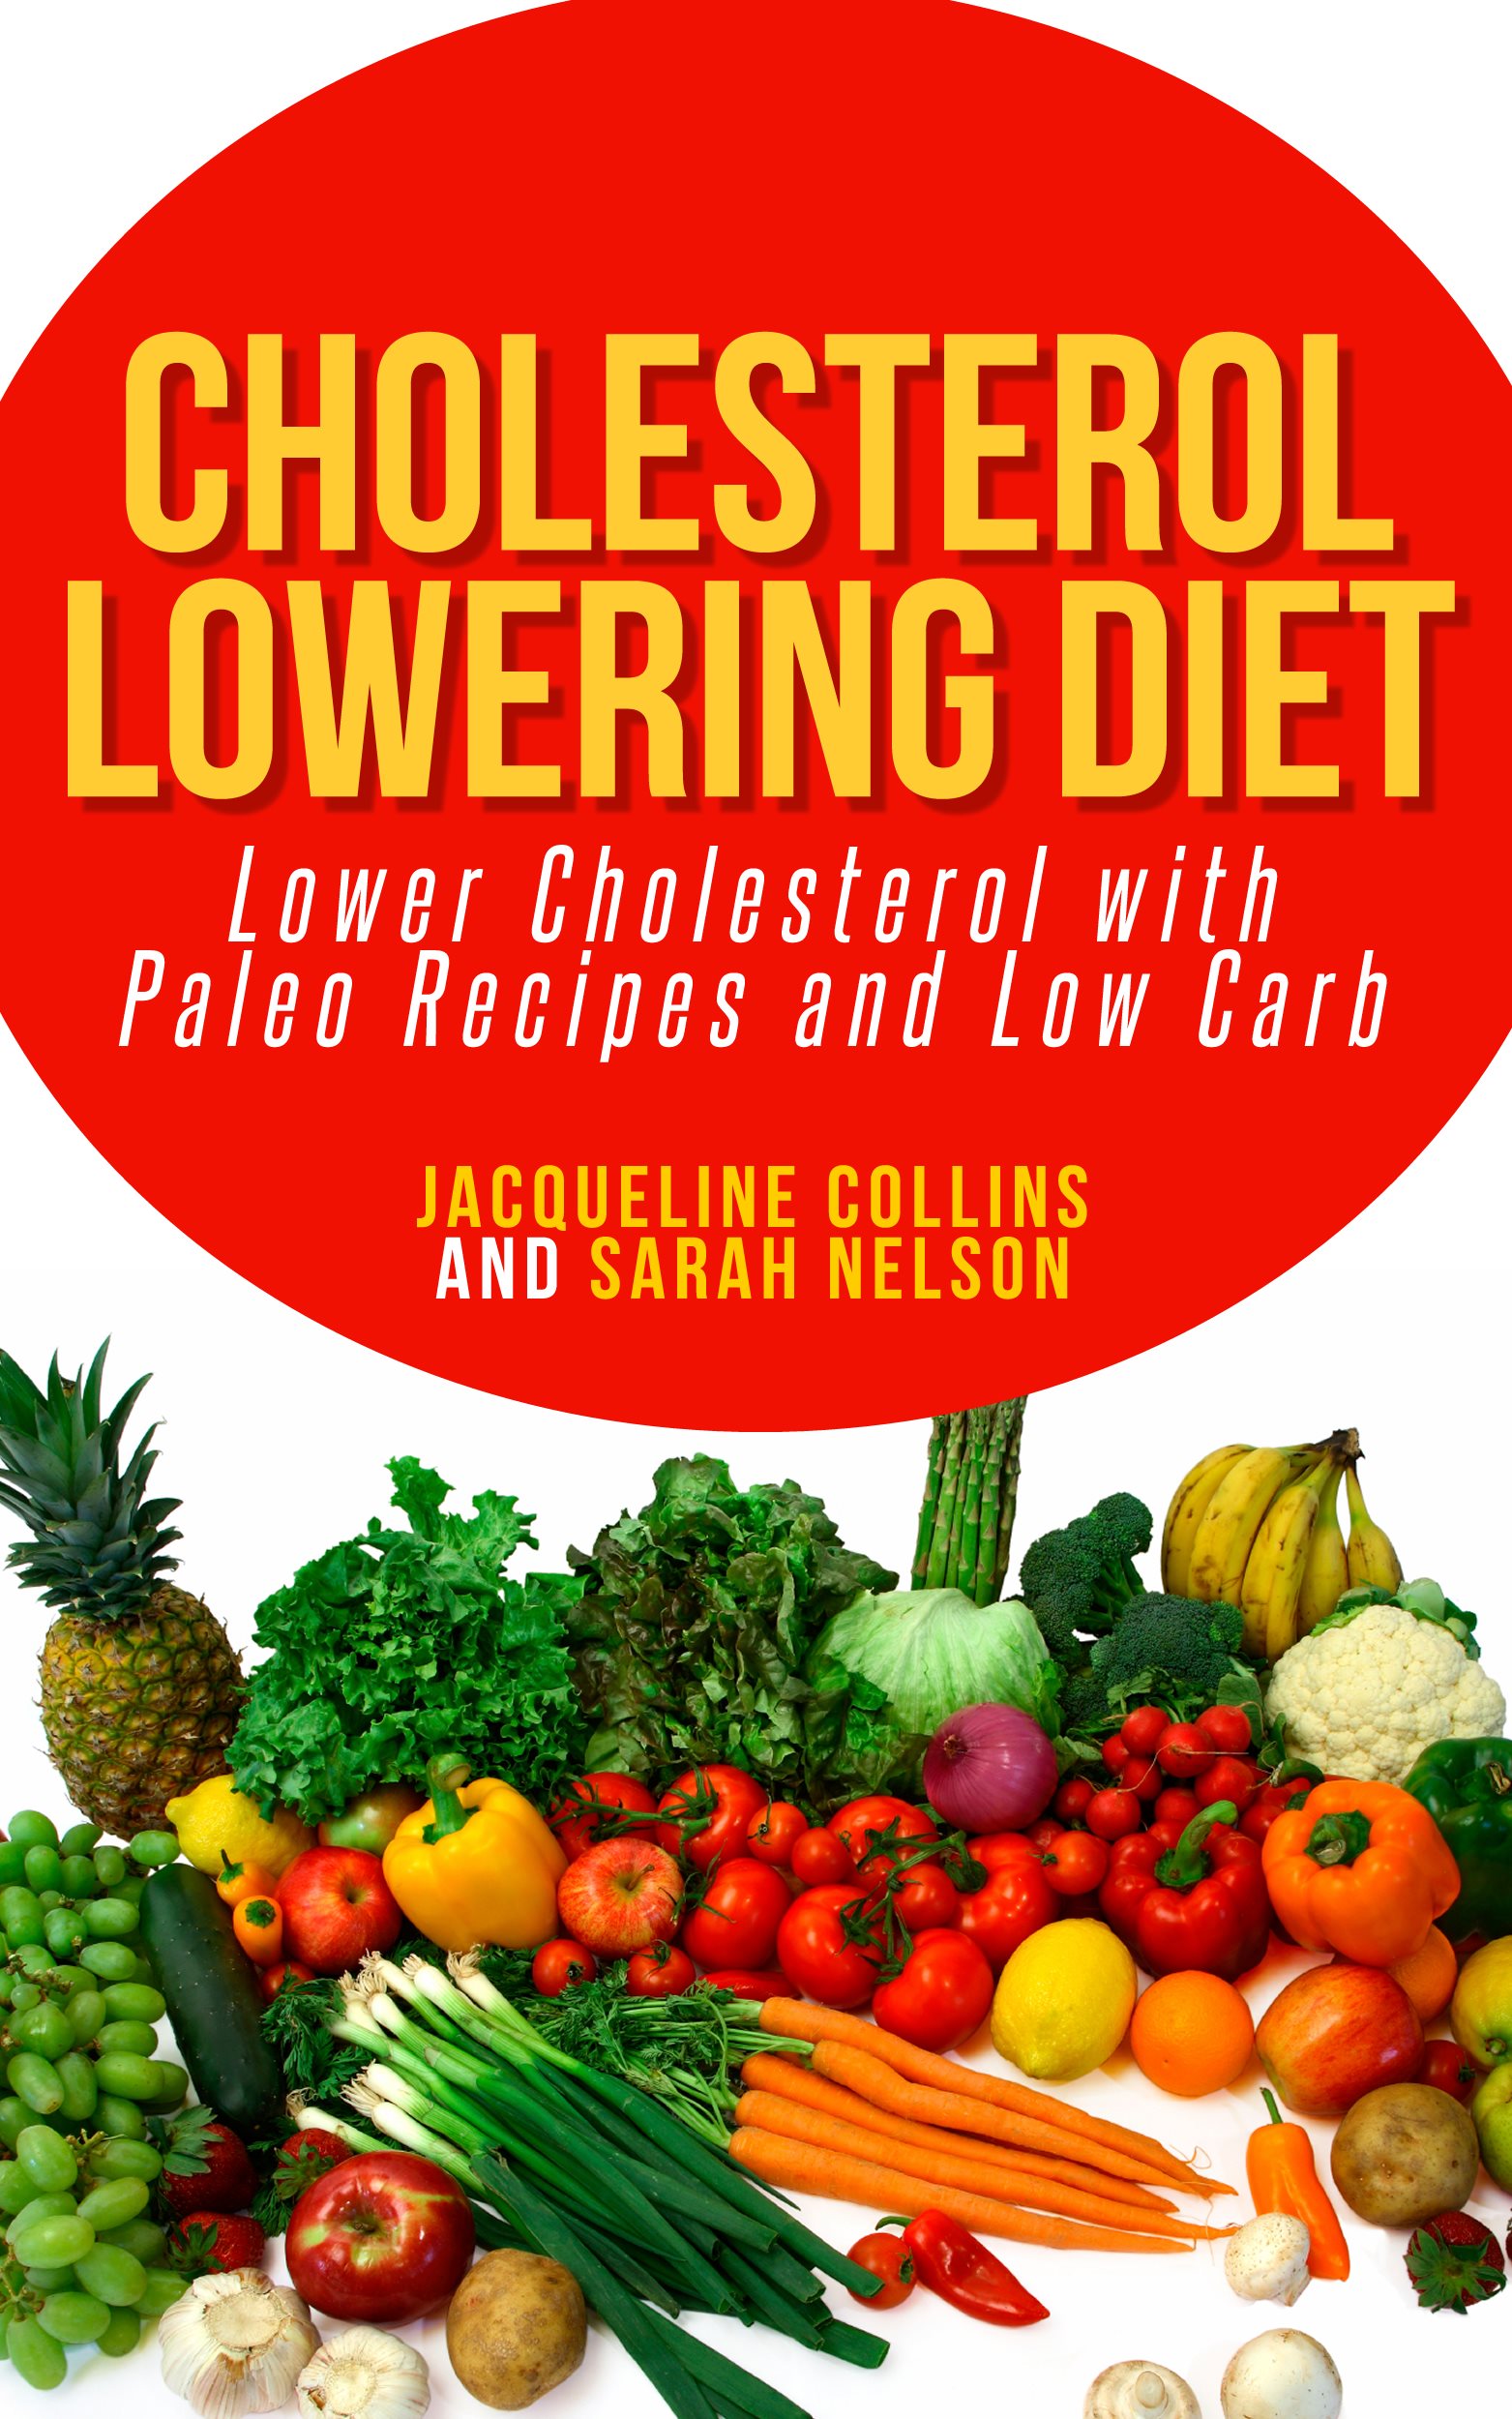 Table of Contents Cholesterol Lowering Diet Lower Cholesterol with Paleo - photo 1